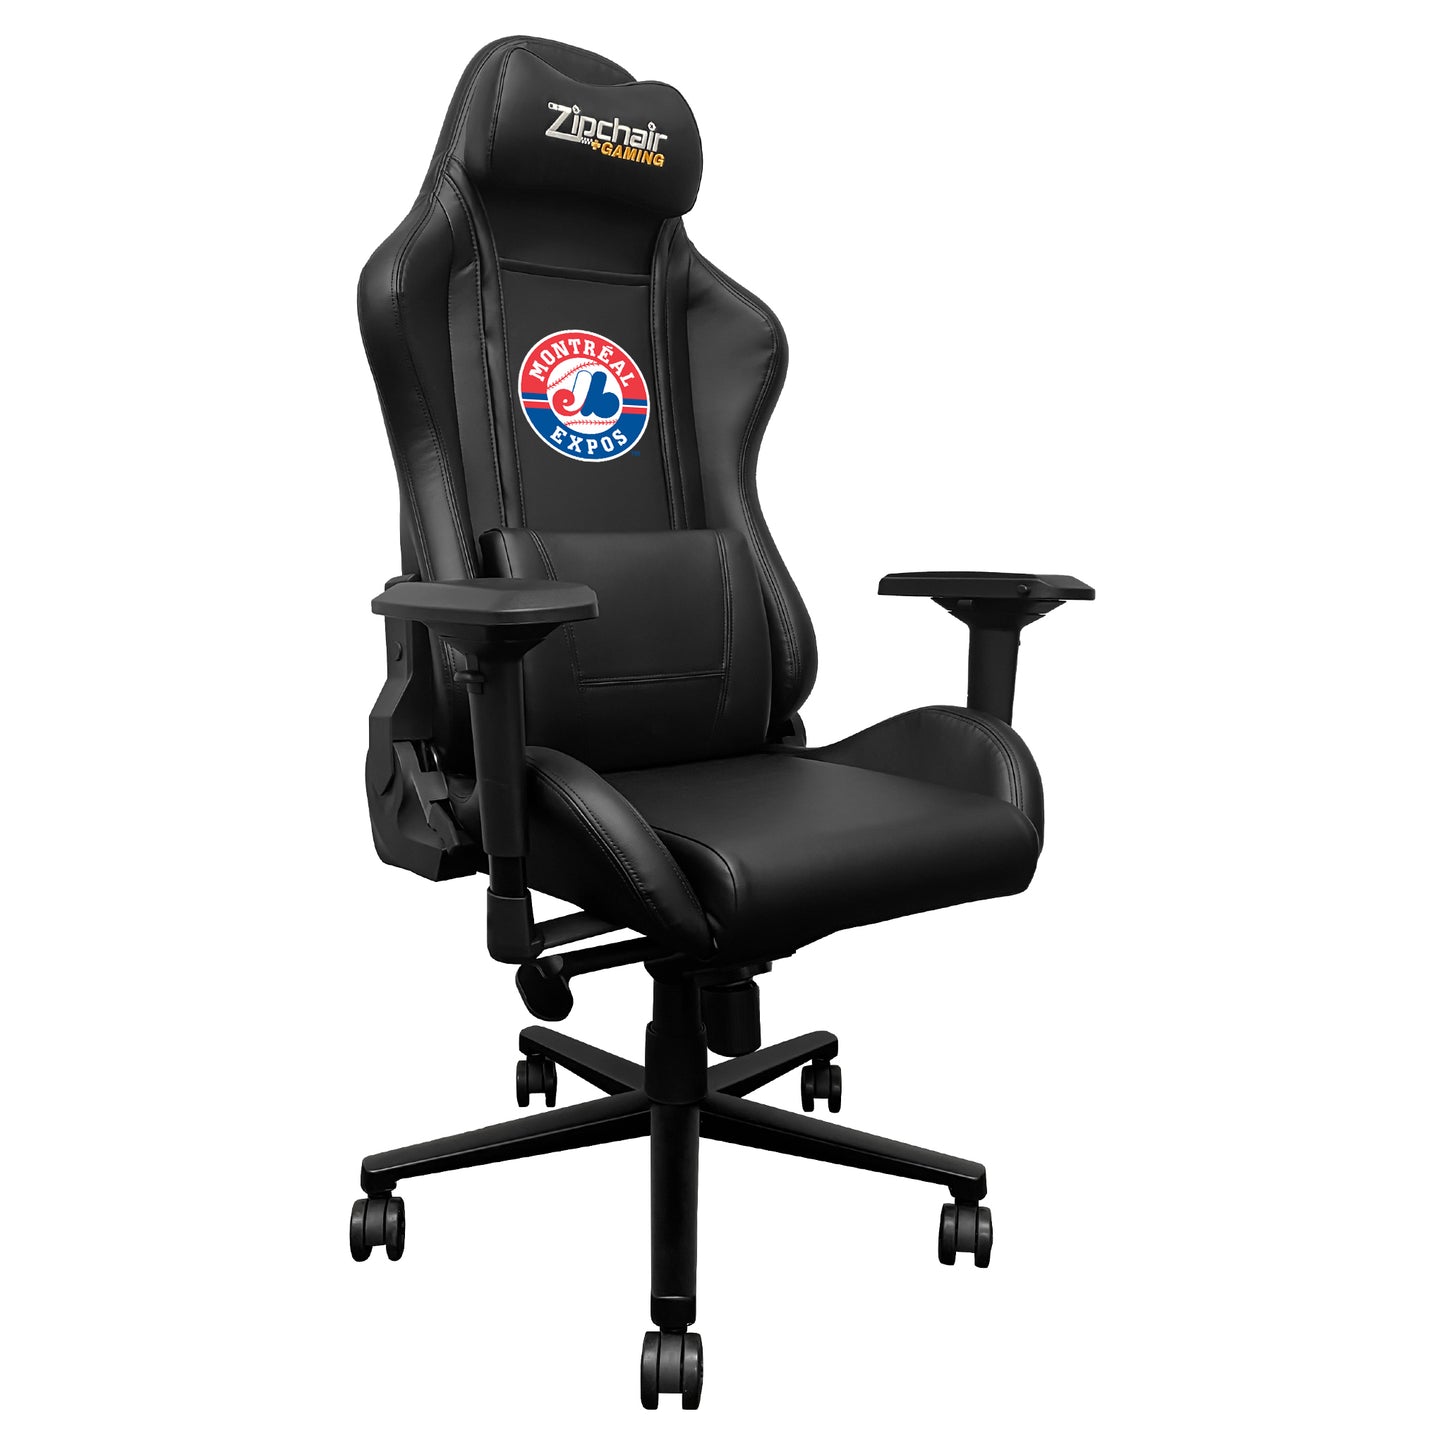 Xpression Pro Gaming Chair with Montreal Expos Cooperstown Logo